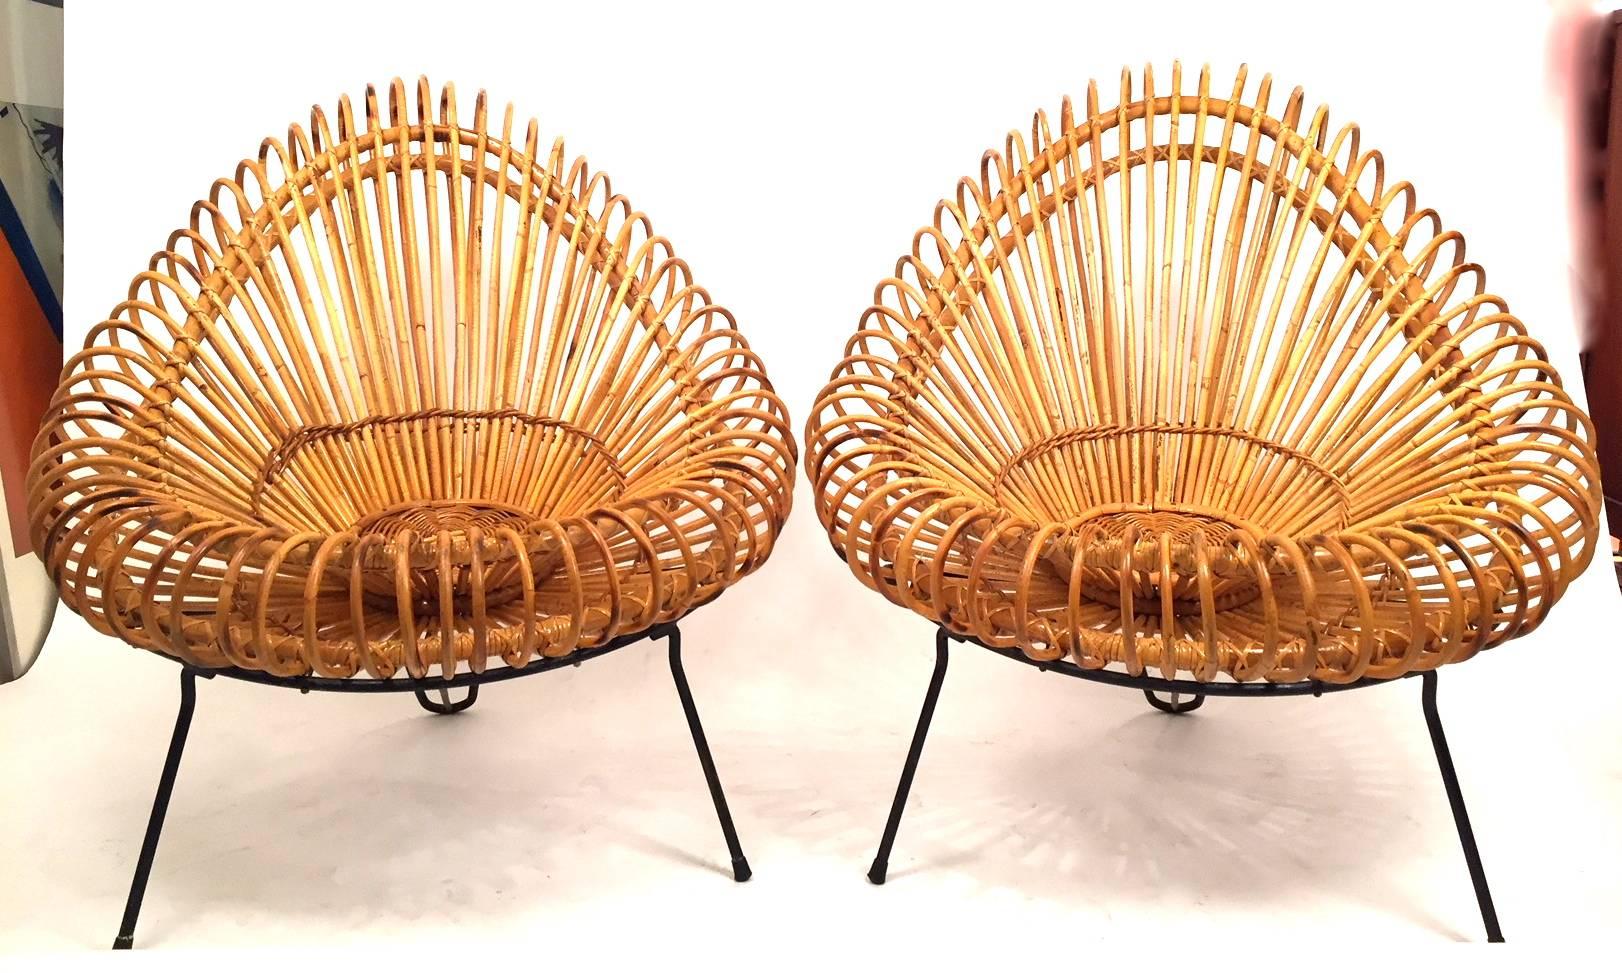 A pair of wicker lounge chairs designed by Janine Abraham and architect Dirk Jan Rol and edited by Rougier in 1955.
Bamboo seat and black lacquered frame. All original. Super condition.